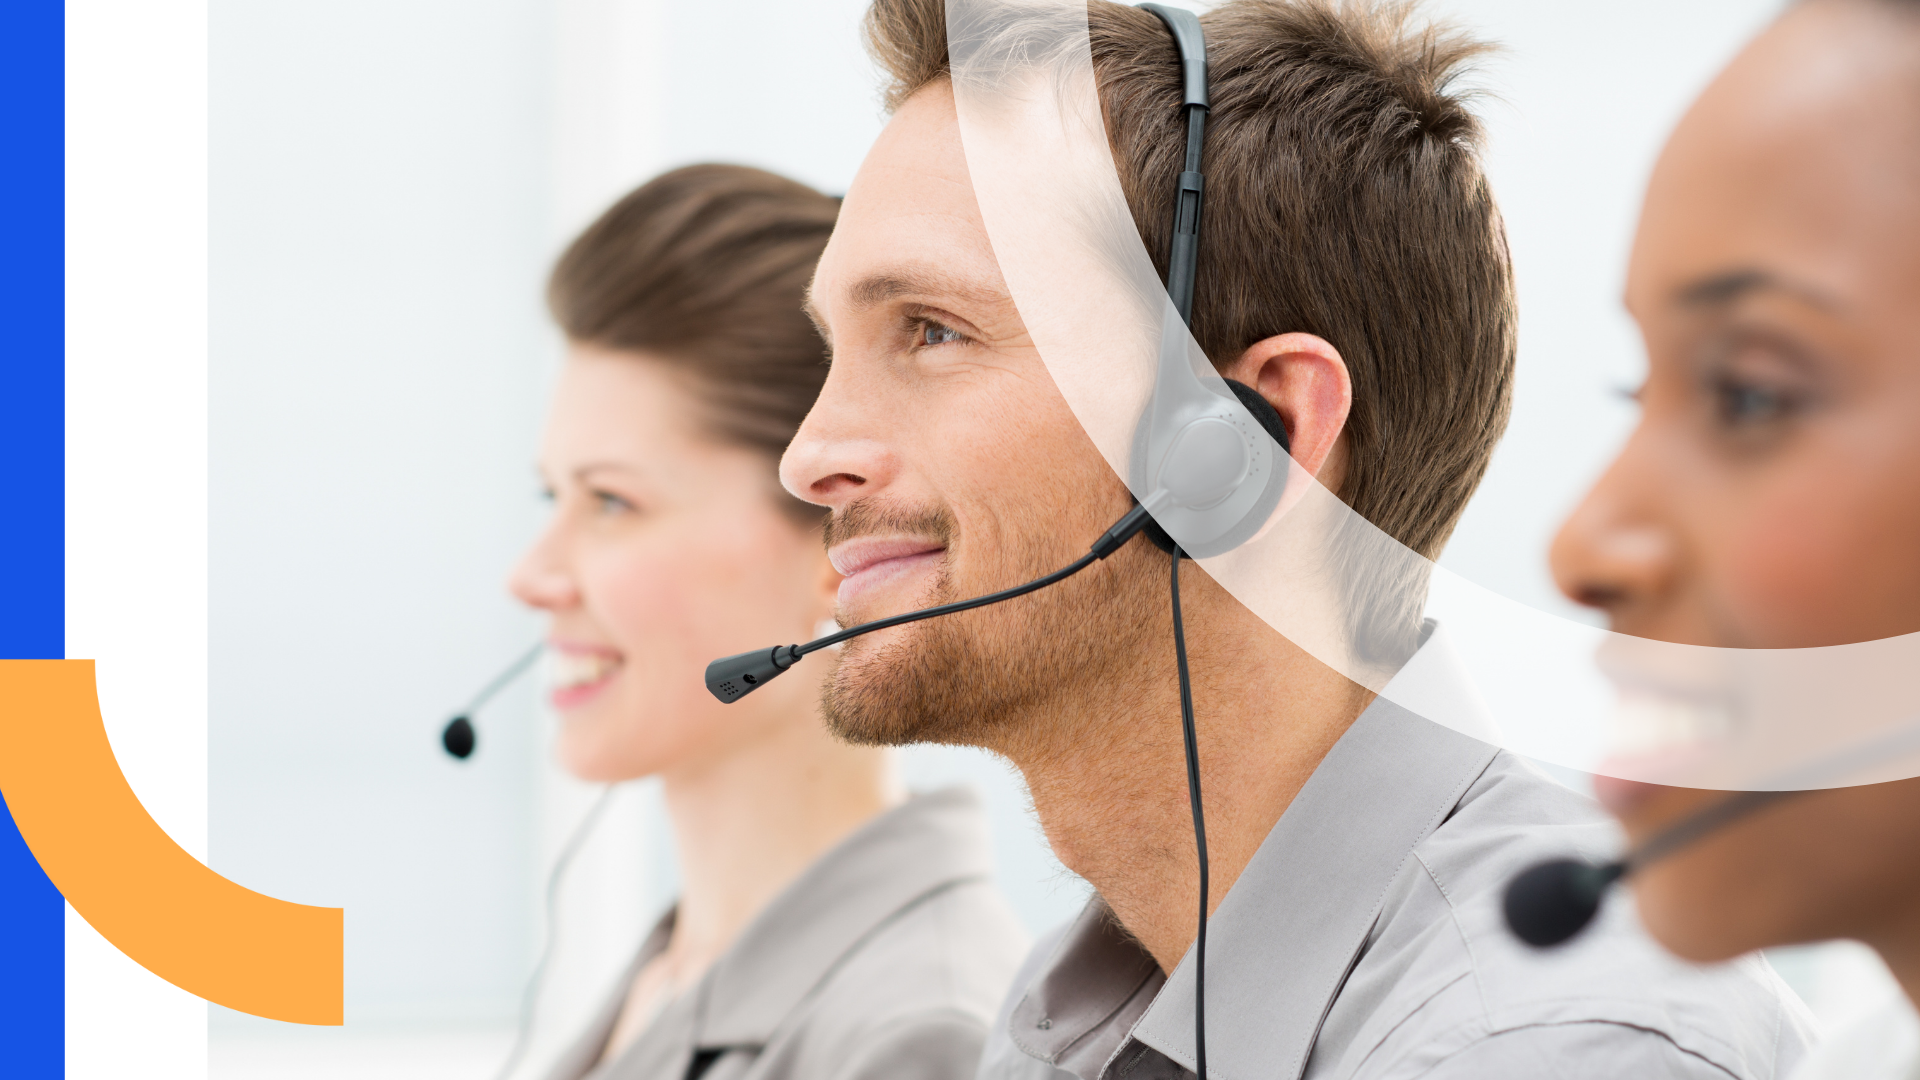 Contact center agents leveraging voice and video to drive an omnichannel customer experience.